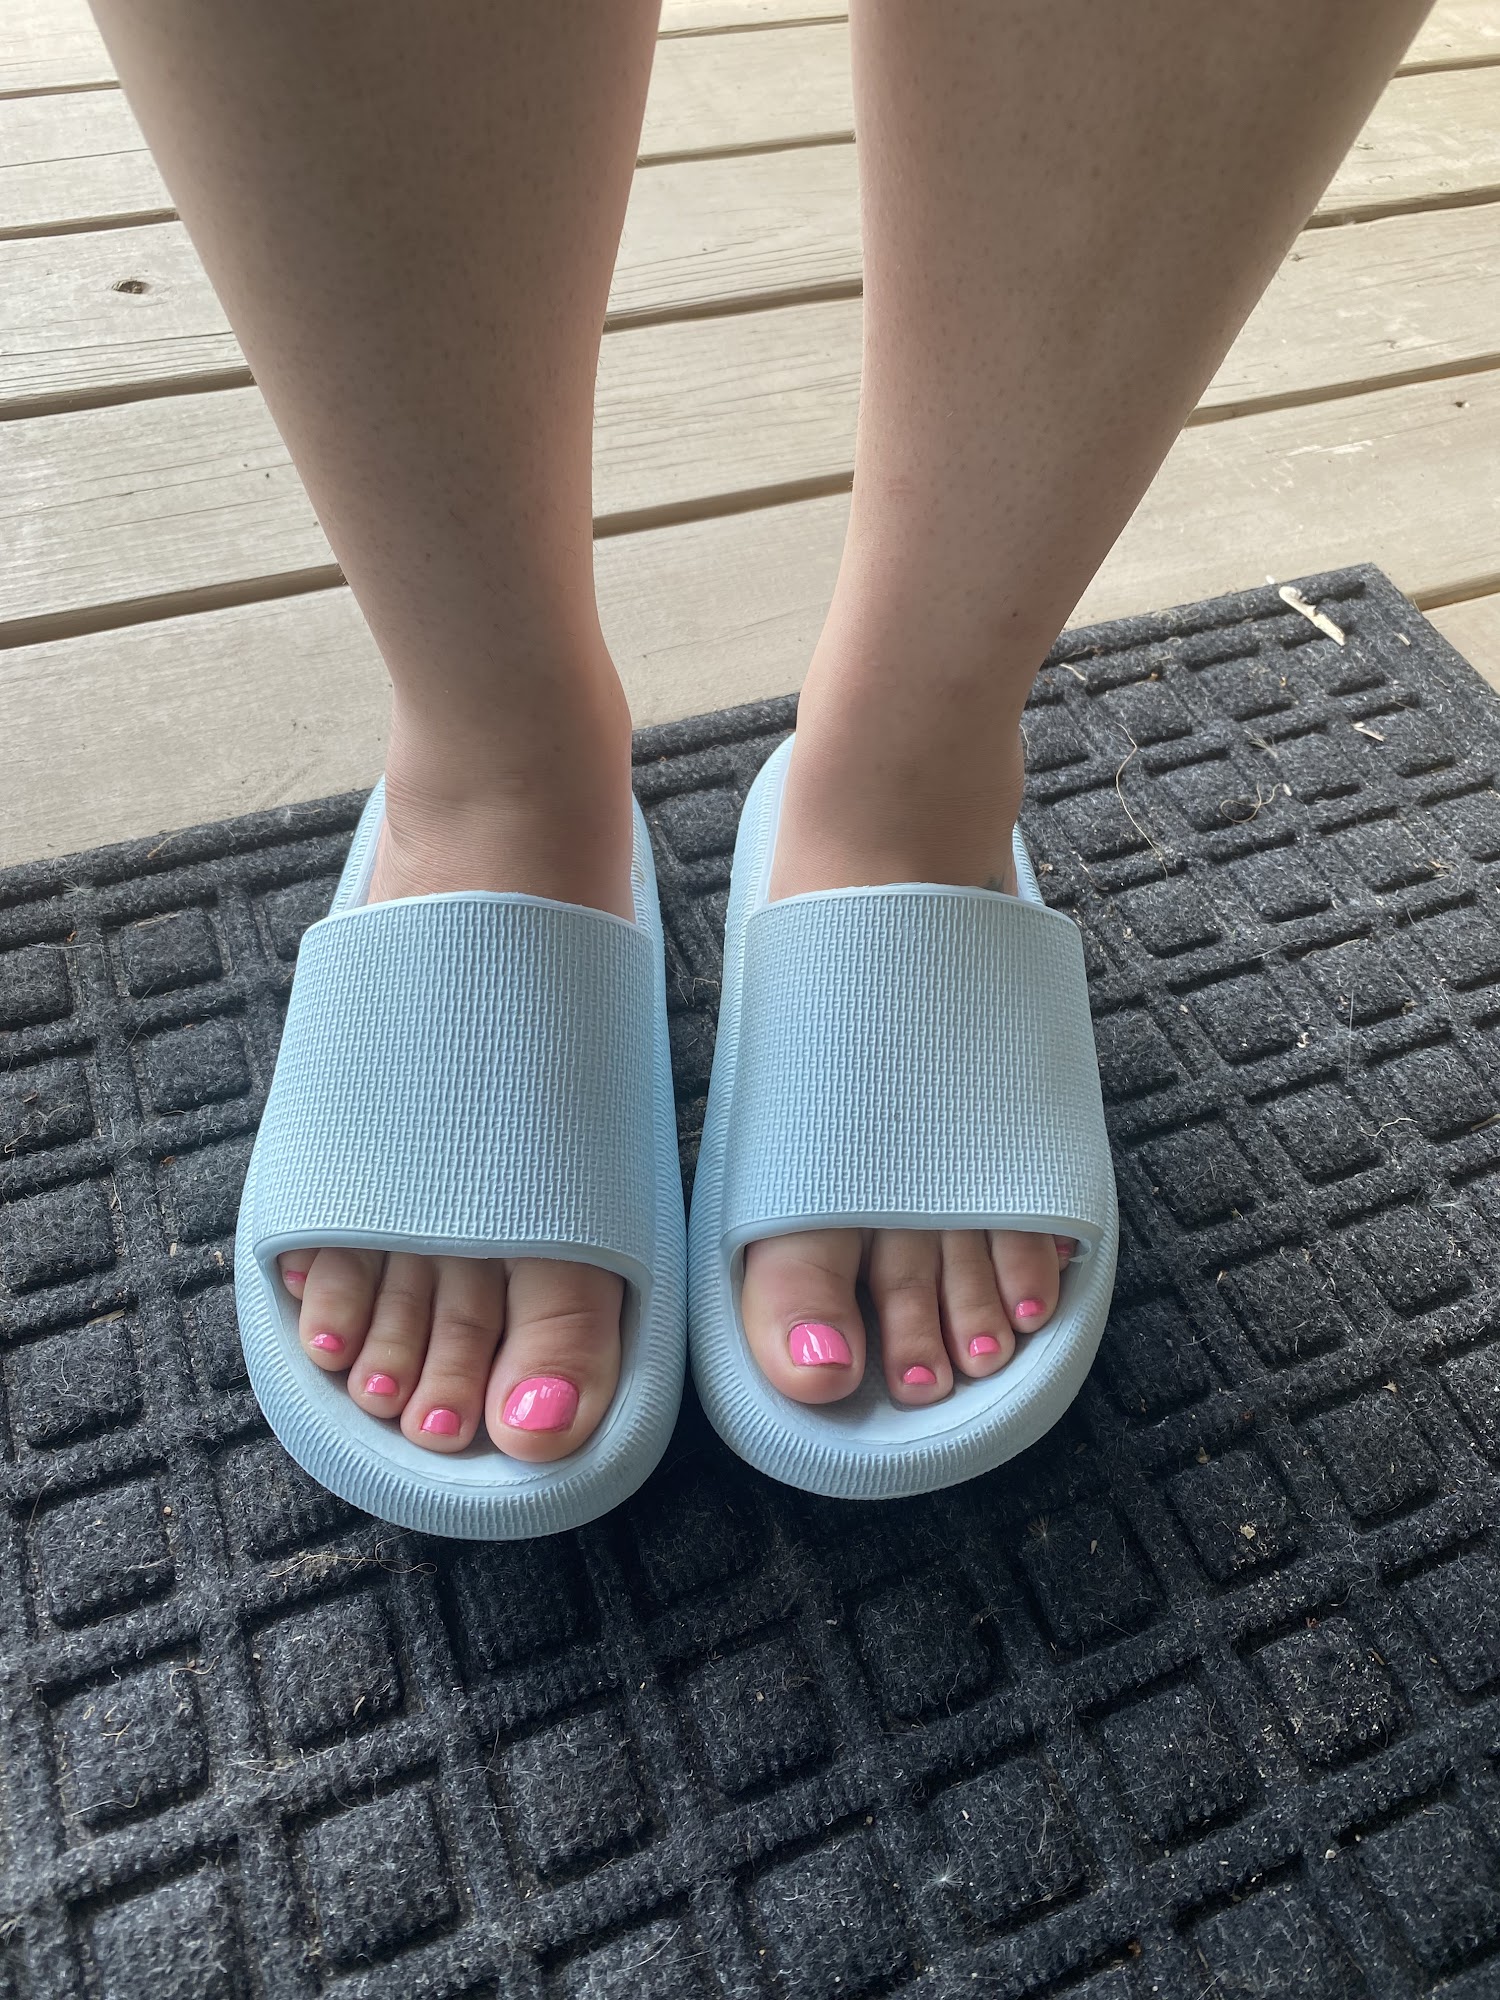 Meticulous Pedicures 1070 S Gregory Rd, Fowlerville Michigan 48836